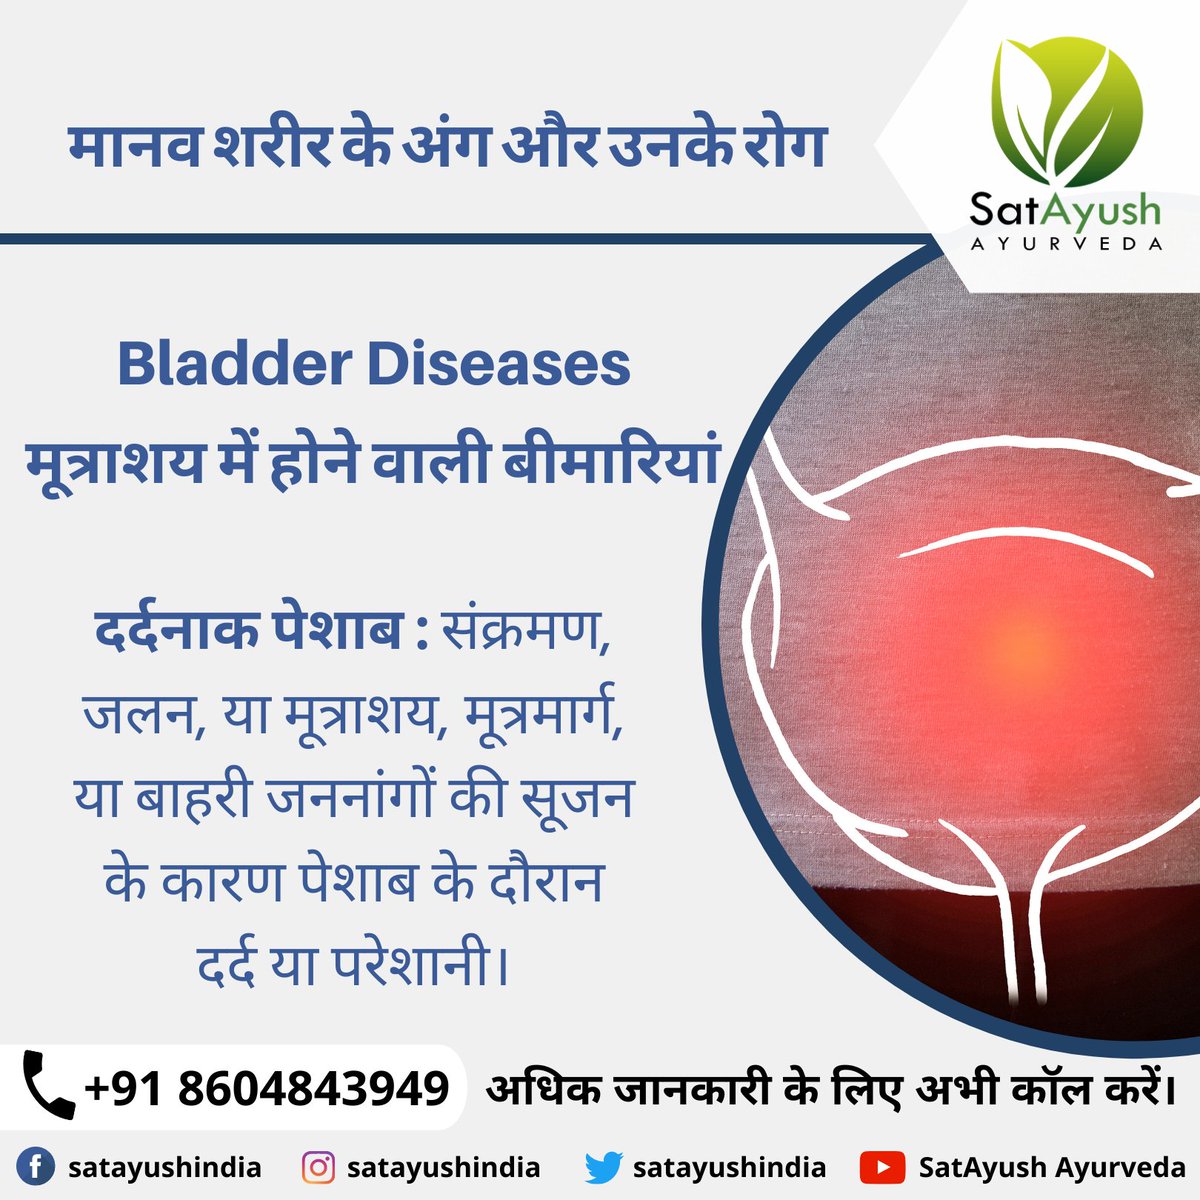 Parts of the #humanbody and their #diseases:- 
#Bladderdiseases -
#Dysuria (#painfulurination): Pain or discomfort during urination due to #infection, #irritation, or inflammation of the bladder, #urethra, or #externalgenitals.

#satayush #satayushayurveda #natural #ayurveda